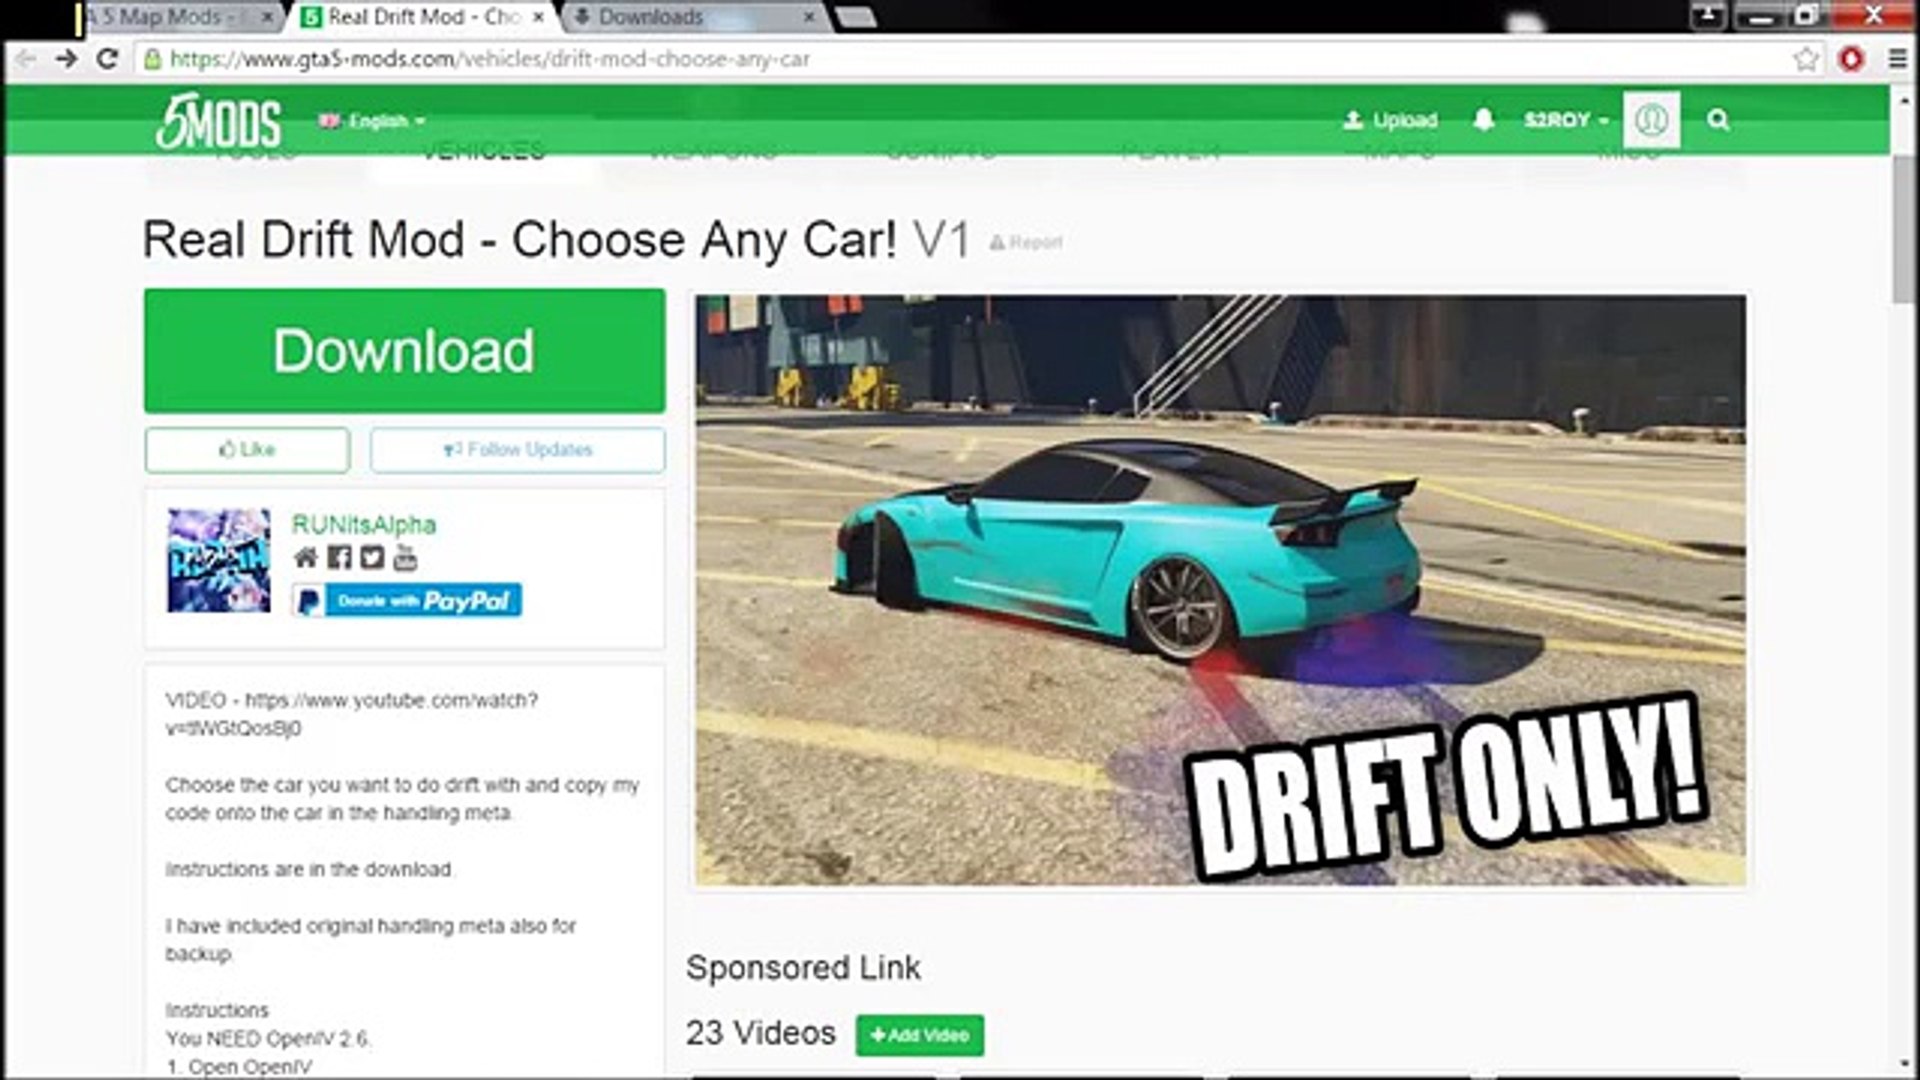 Easy How To Drift Mod Gta 5 Select What Car You Want To Drift Dailymotion Video